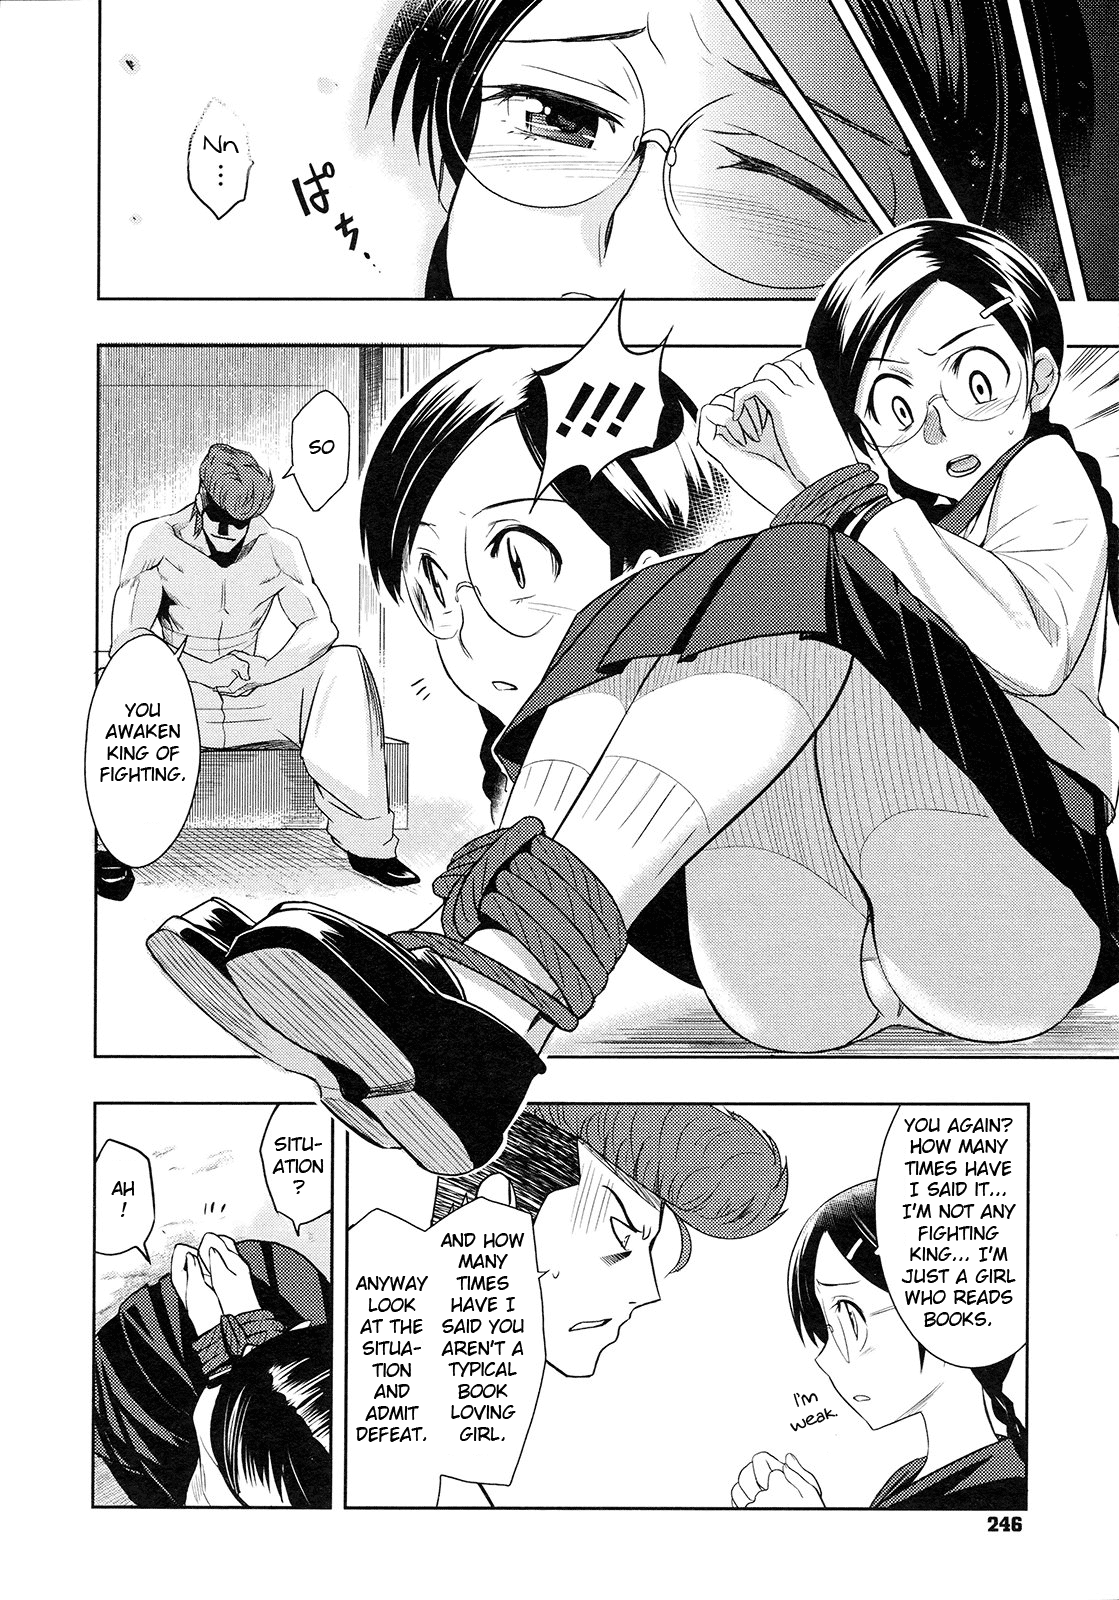 [Shinsuke Inue] The Strongest Man VS The King of Fighting [Eng] {doujin-moe.us} 